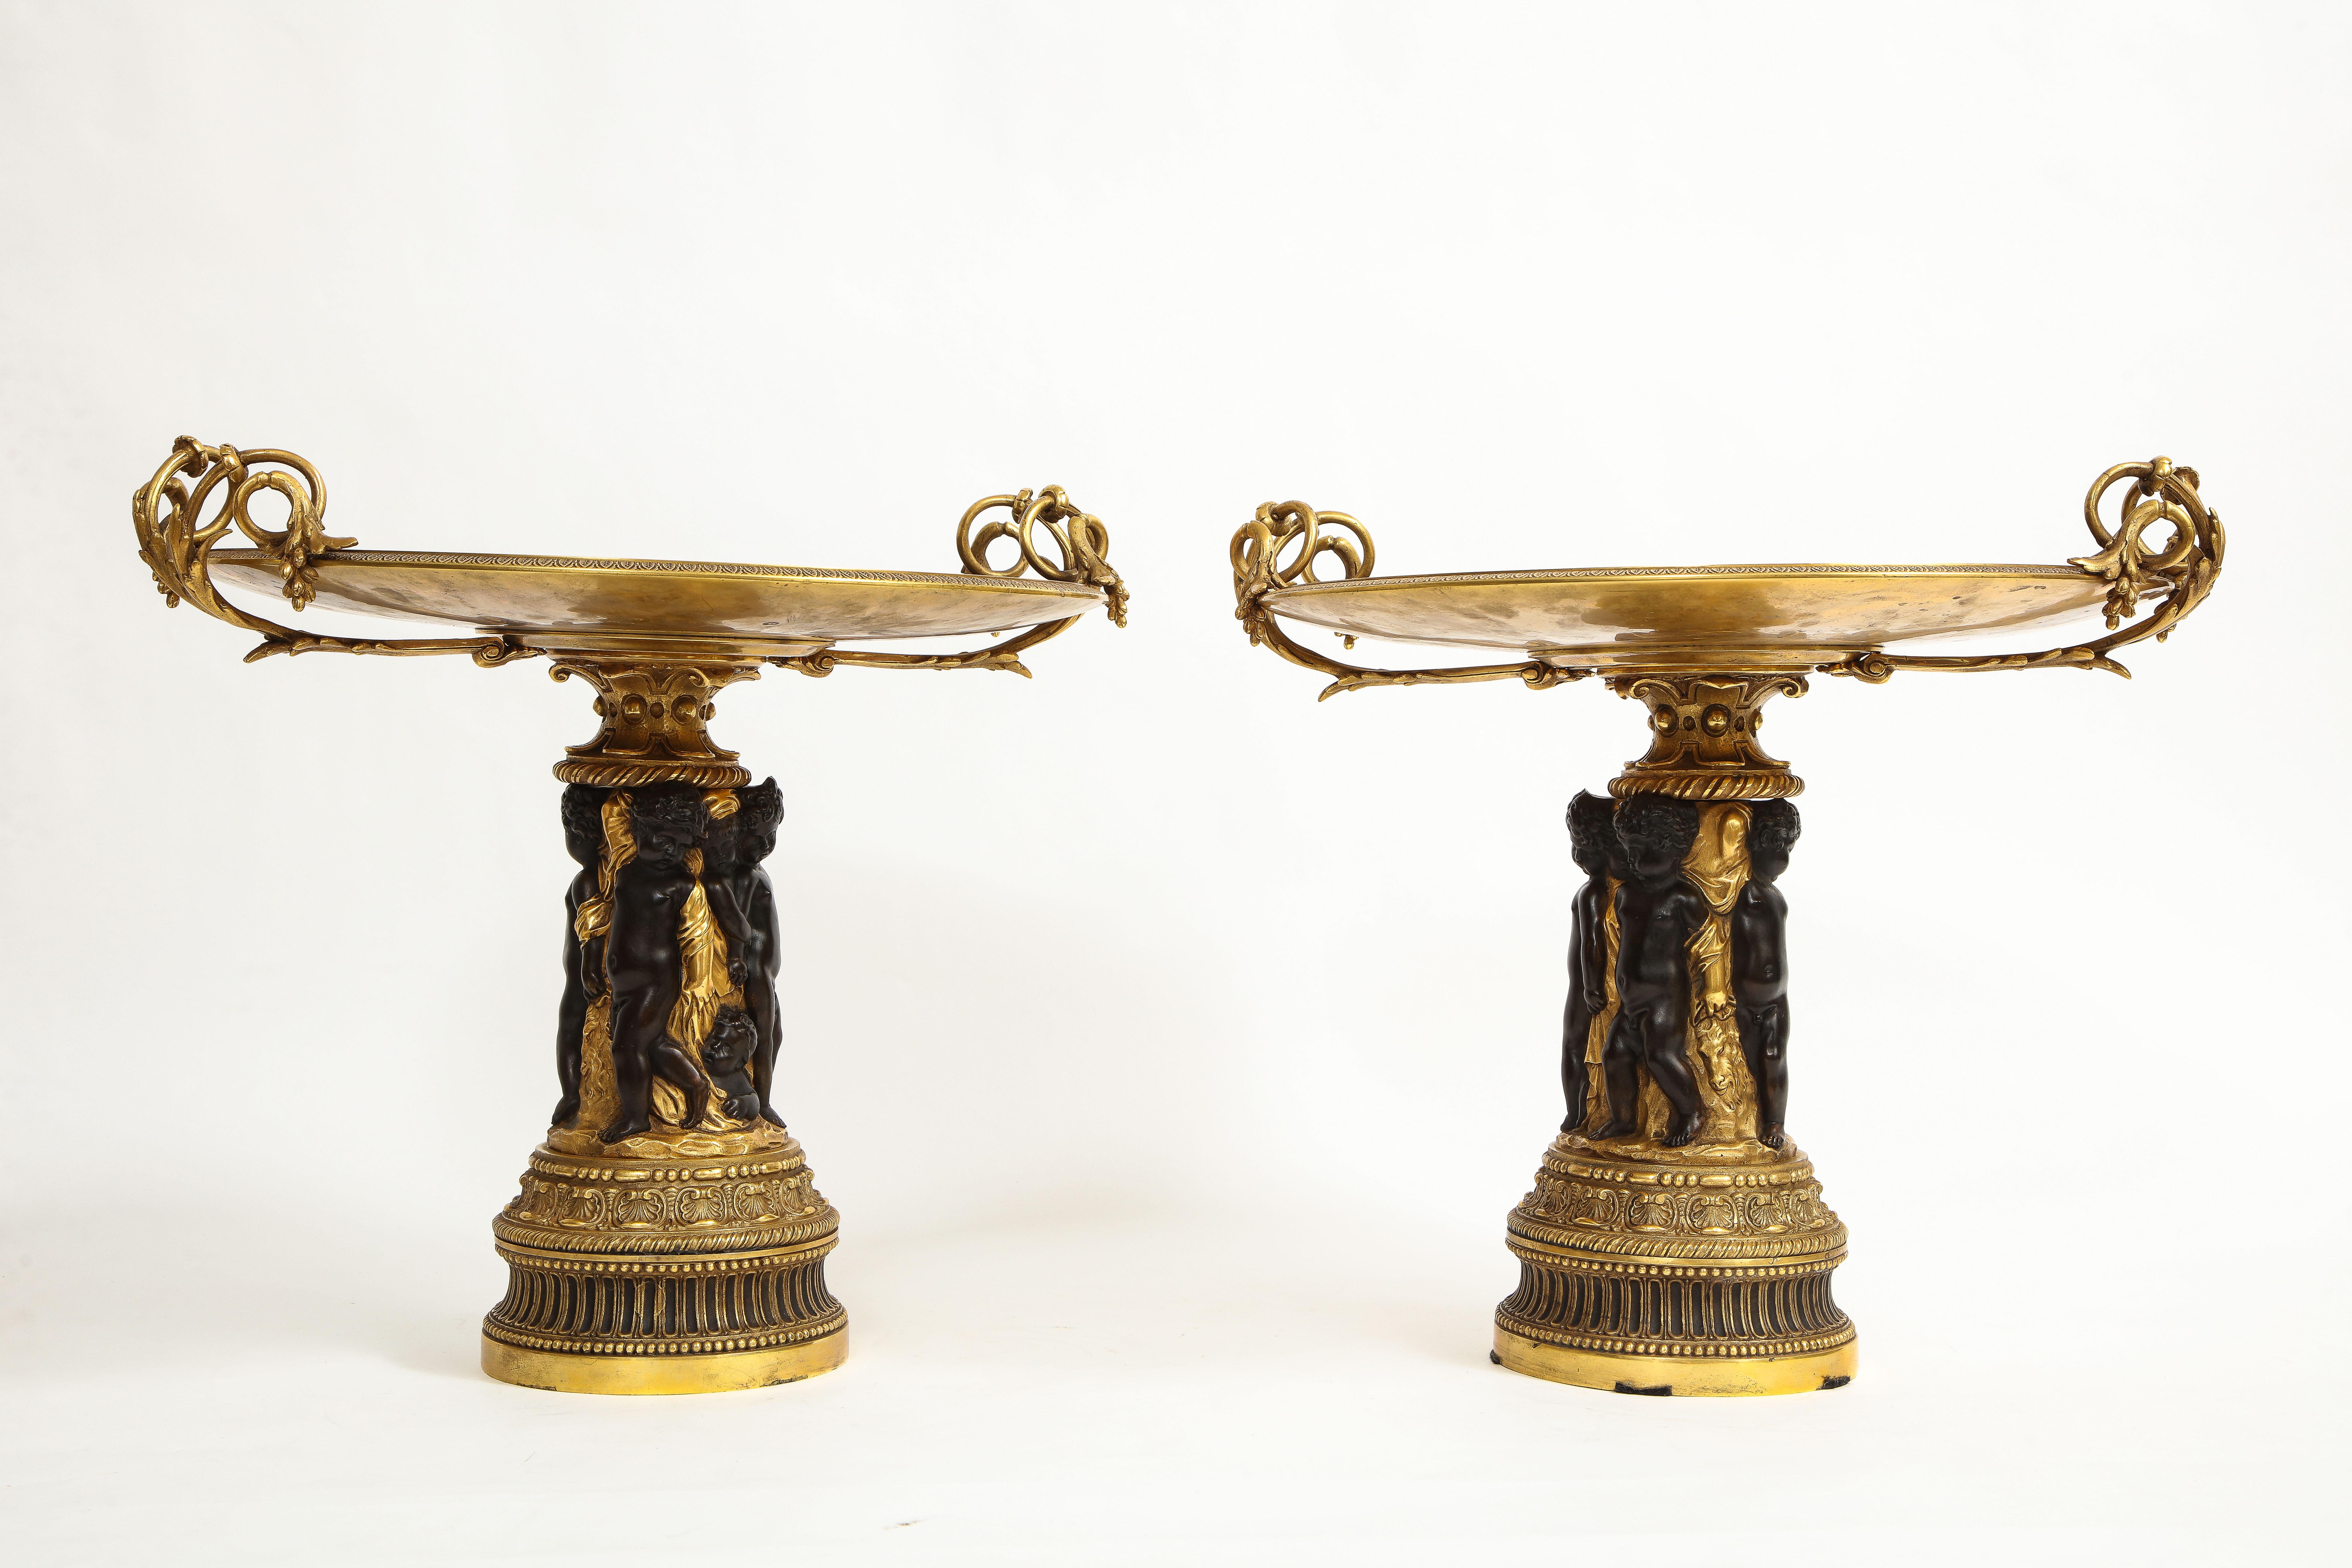 Napoleon III Pair of French 19th Century Dore and Patinated Bronze Handled Tazzas w/ Putti For Sale